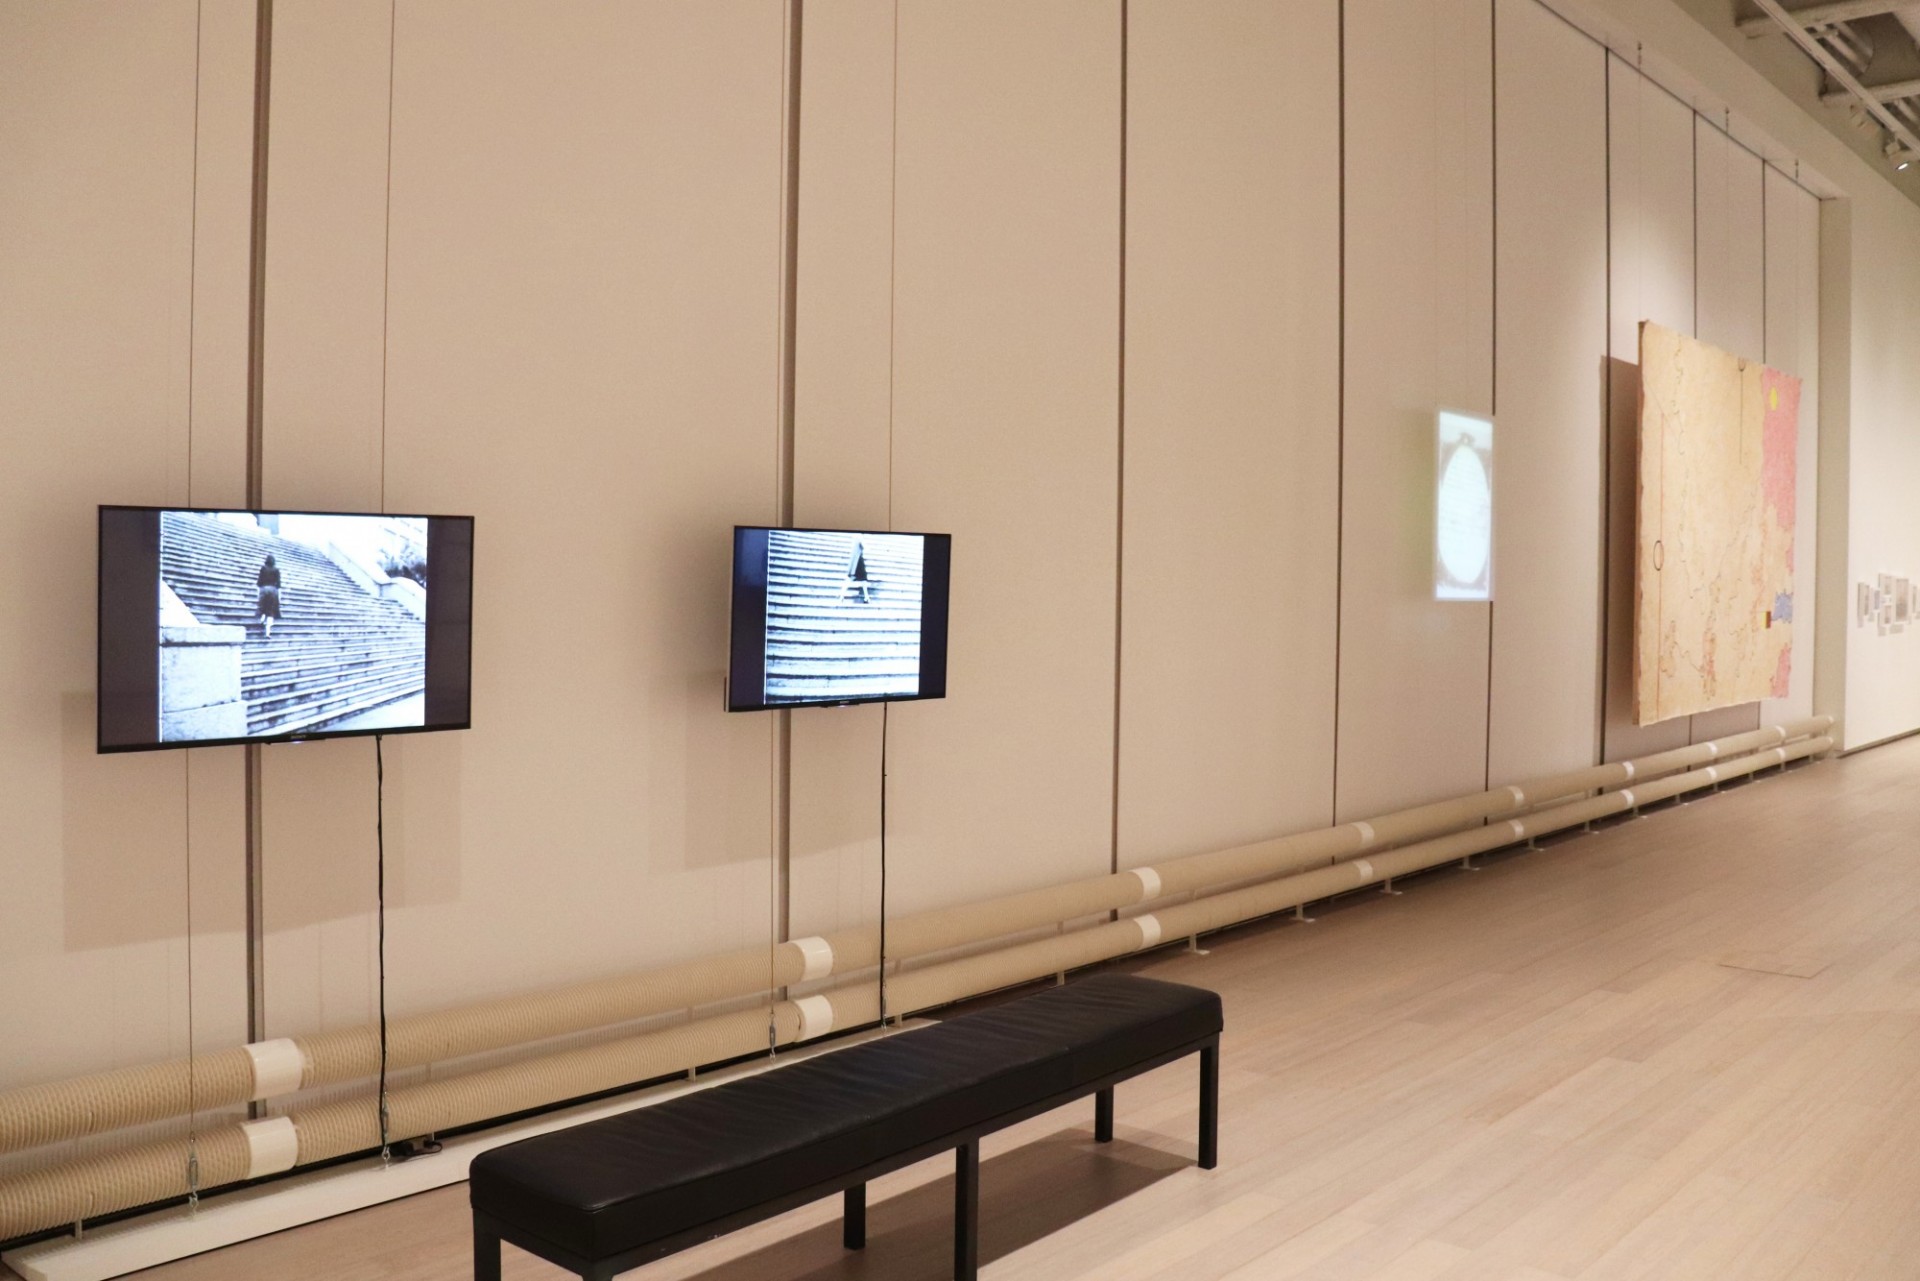 Installation view of the 2018 presentation of "MODA Curates" on view at the Wallach Art Gallery, Columbia University March 24–April 8, 2018. Photo by Eddie Bartolomei.